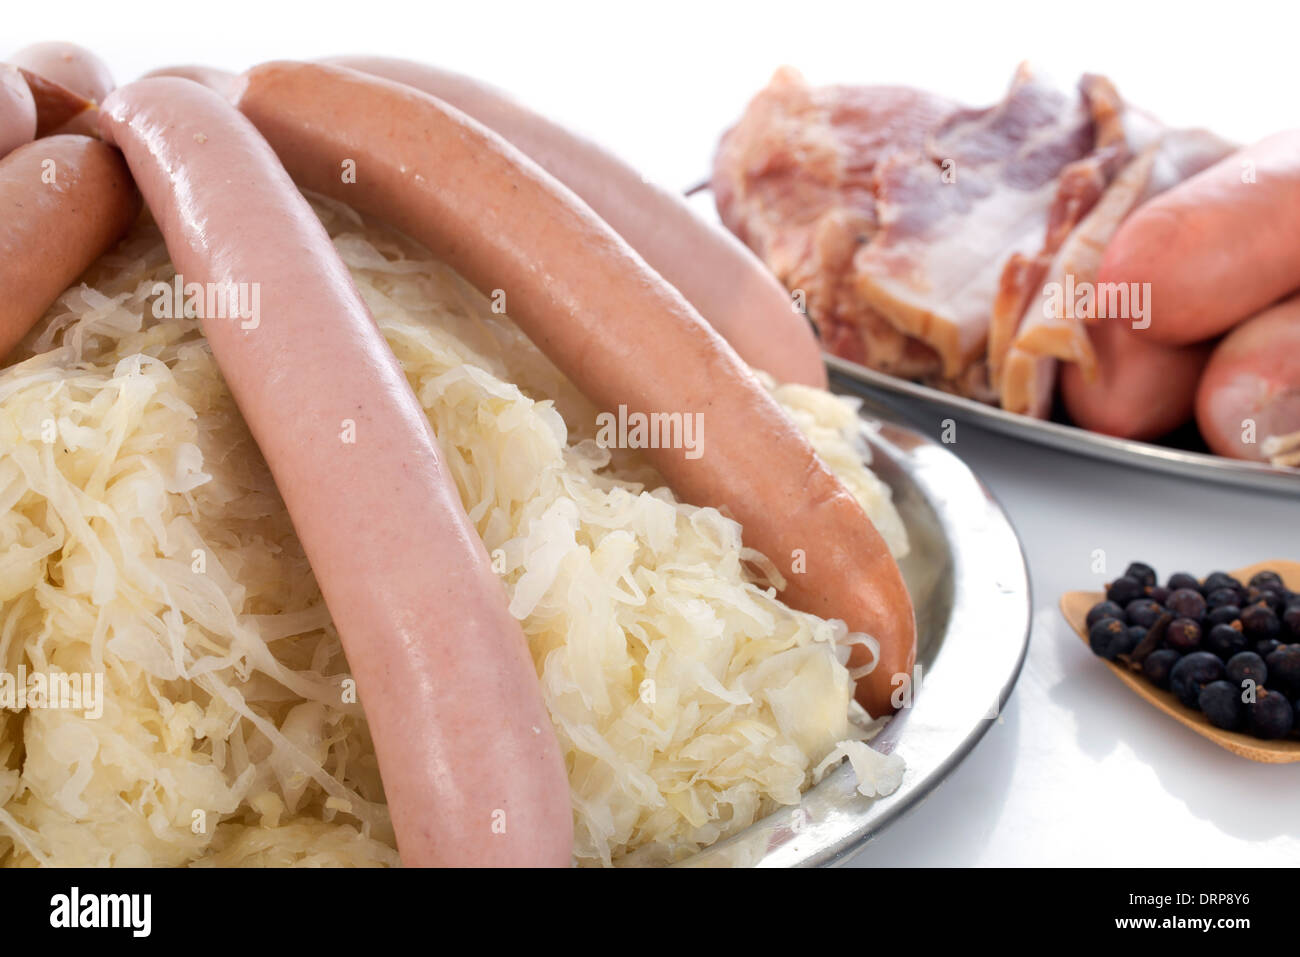 Sauerkraut and cooked meats in front of white background Stock Photo